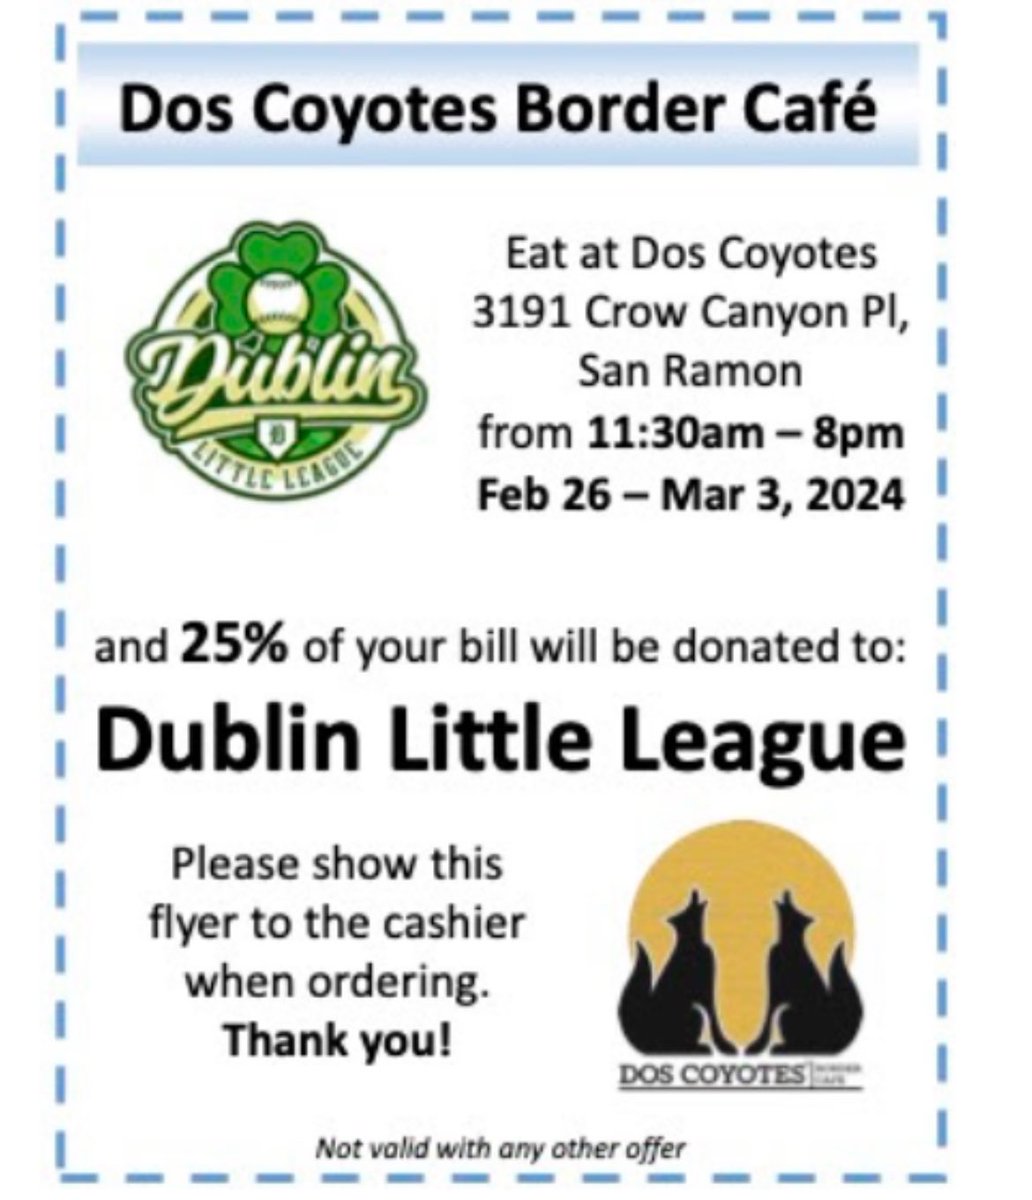 Support DLL and @Dos_Coyotes at the same time! #fundraiser #DLLsoftball #DLLbaseball #dllbaseballfriends